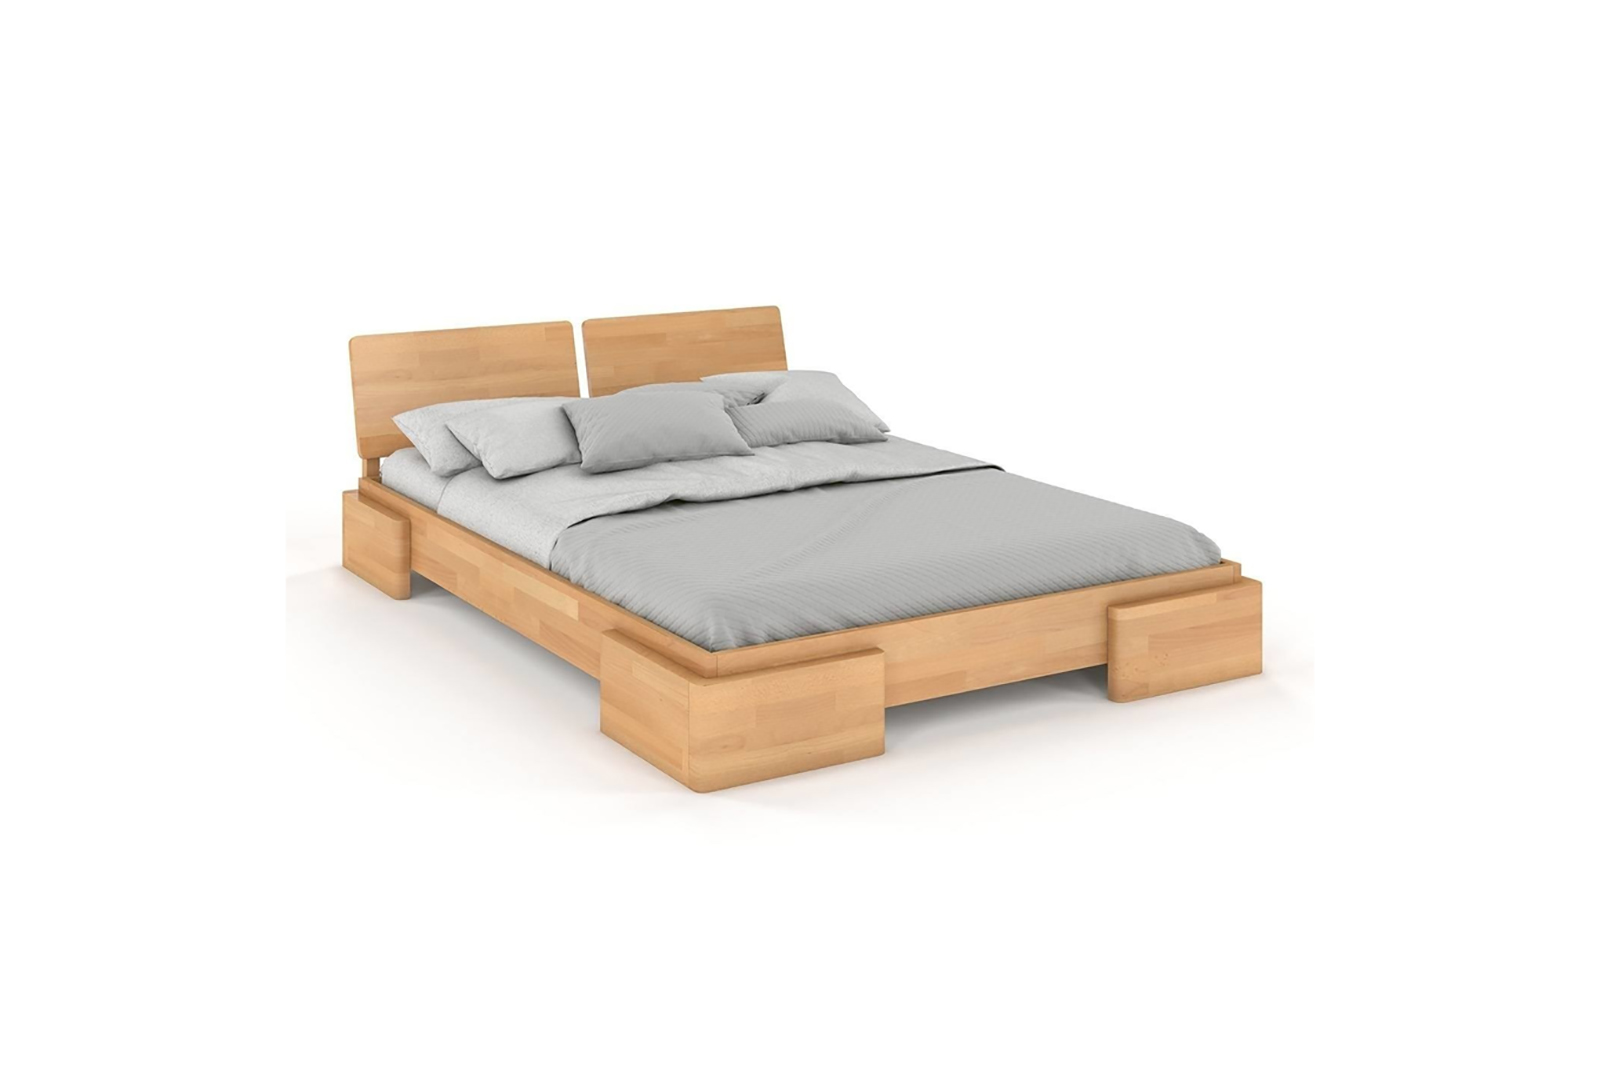 VISBY ARGENTO BEECH BED